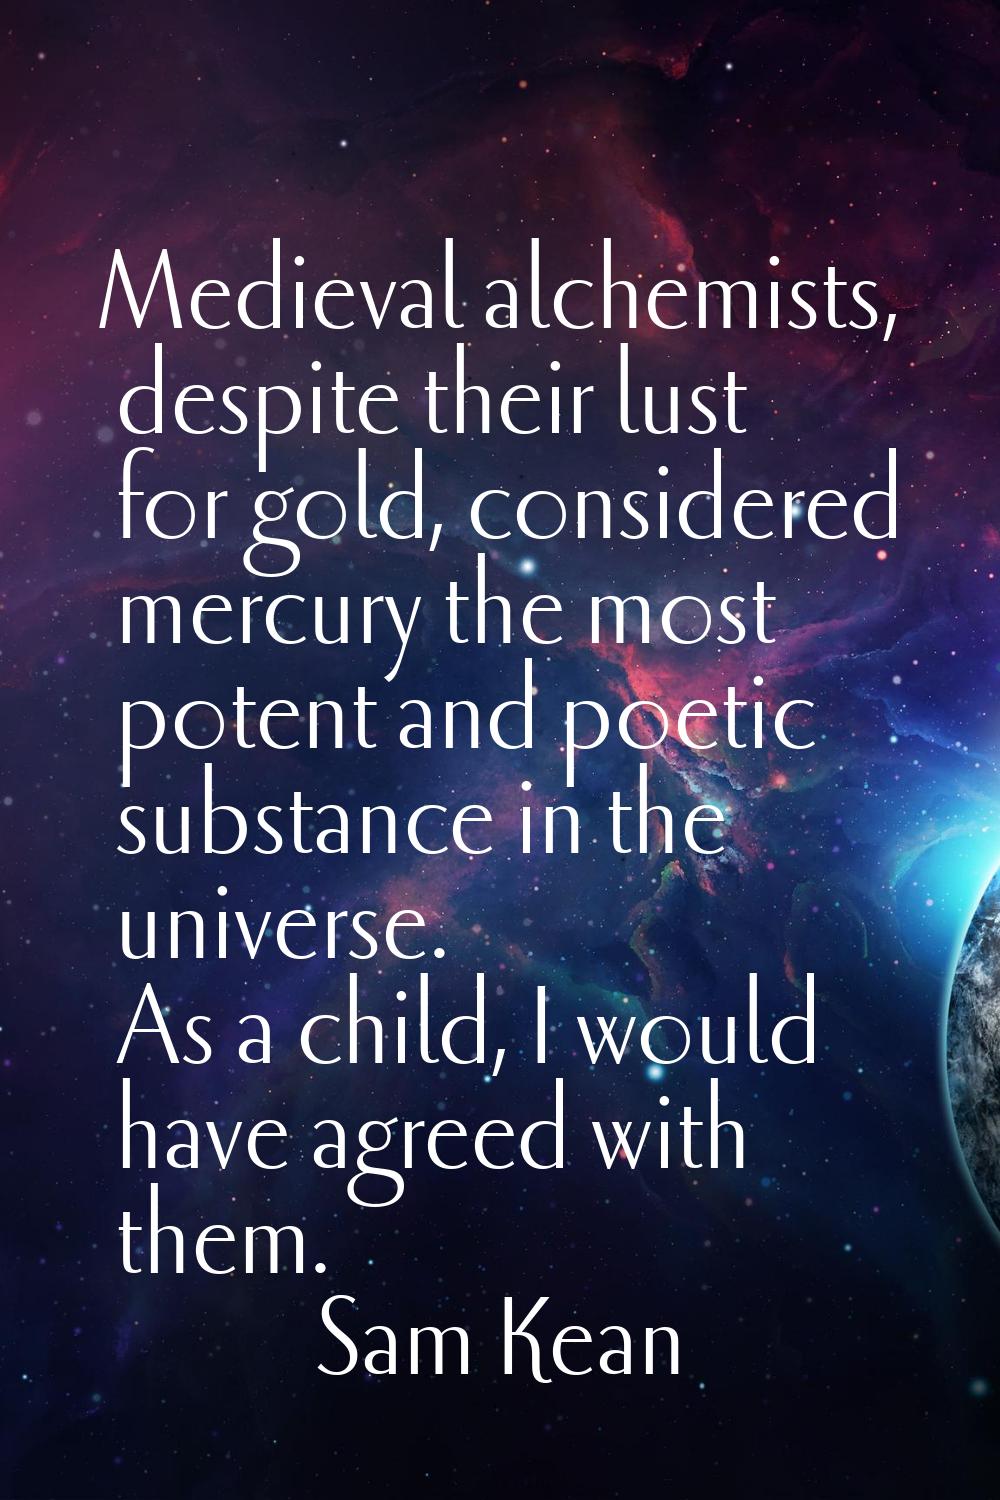 Medieval alchemists, despite their lust for gold, considered mercury the most potent and poetic sub